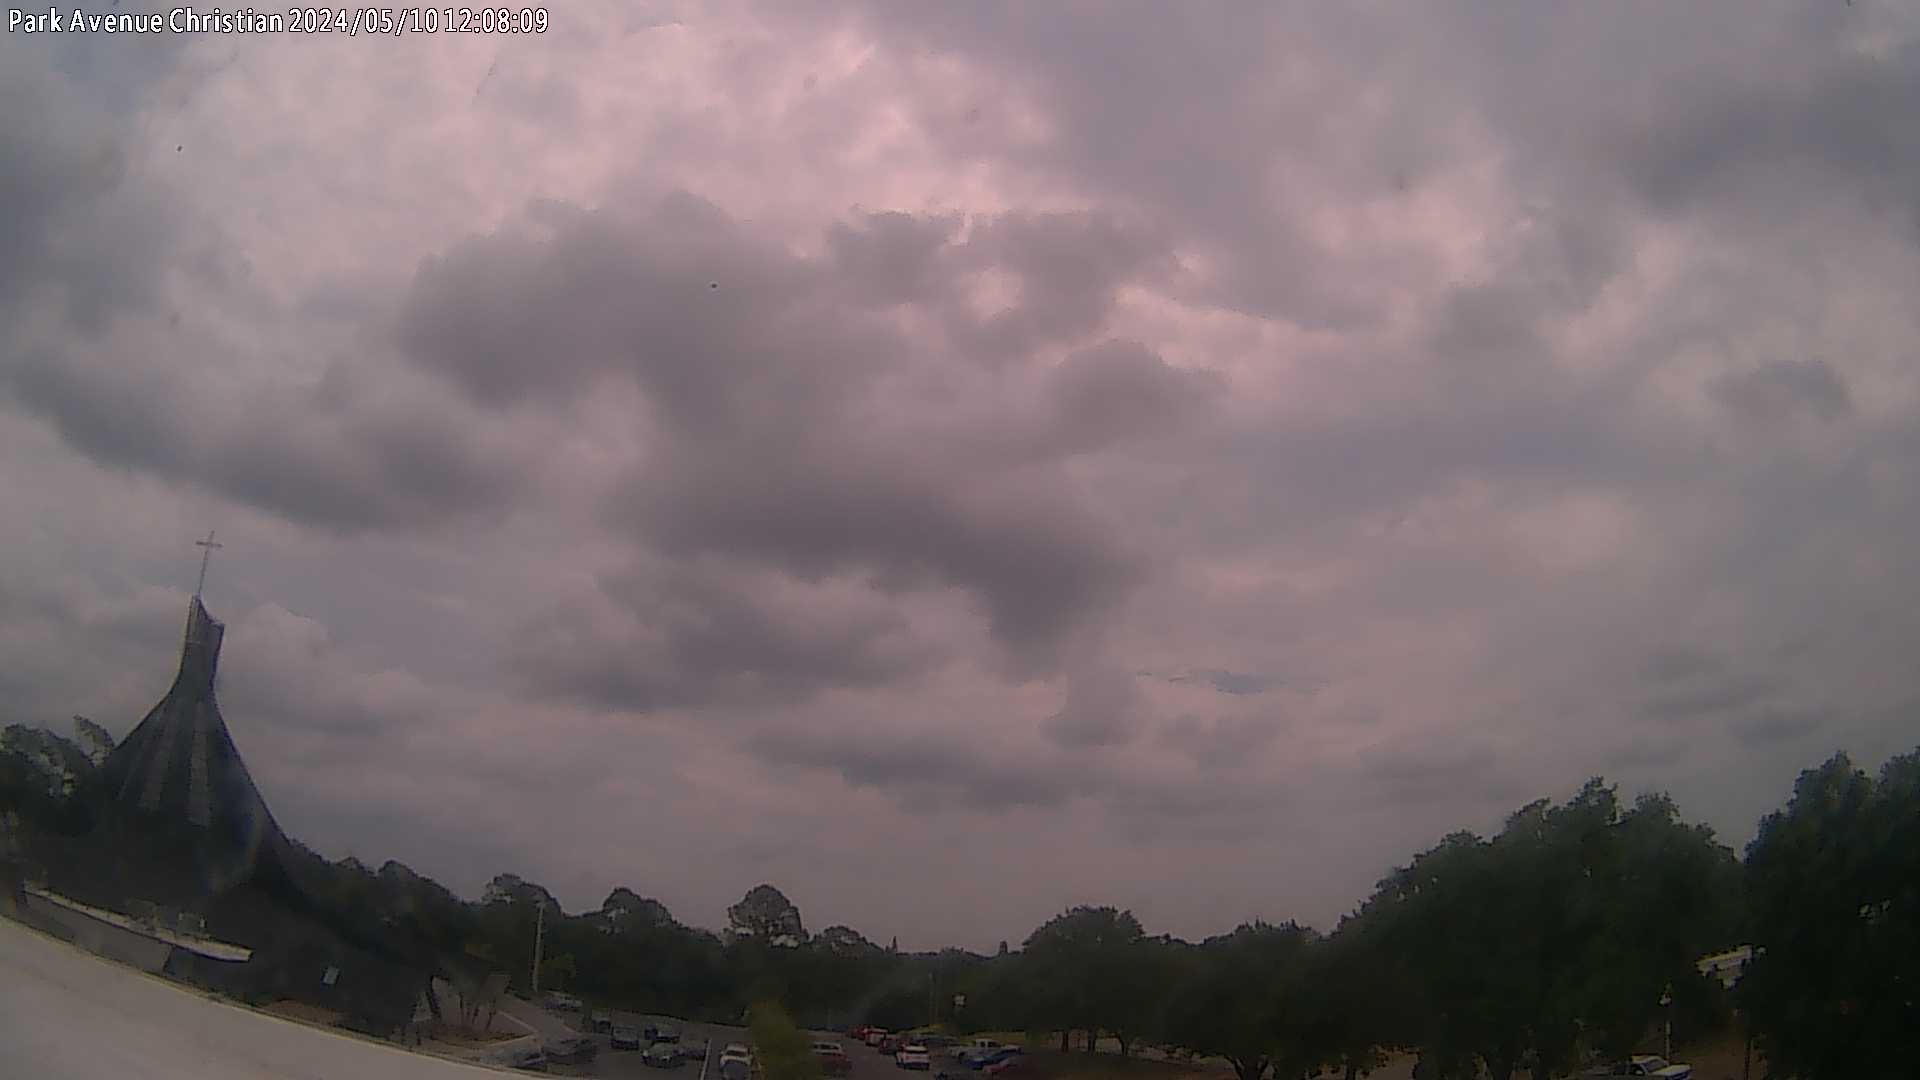 WeatherSTEM Cloud Camera PACWxSTEM in Brevard County, Florida FL at PAC Academy